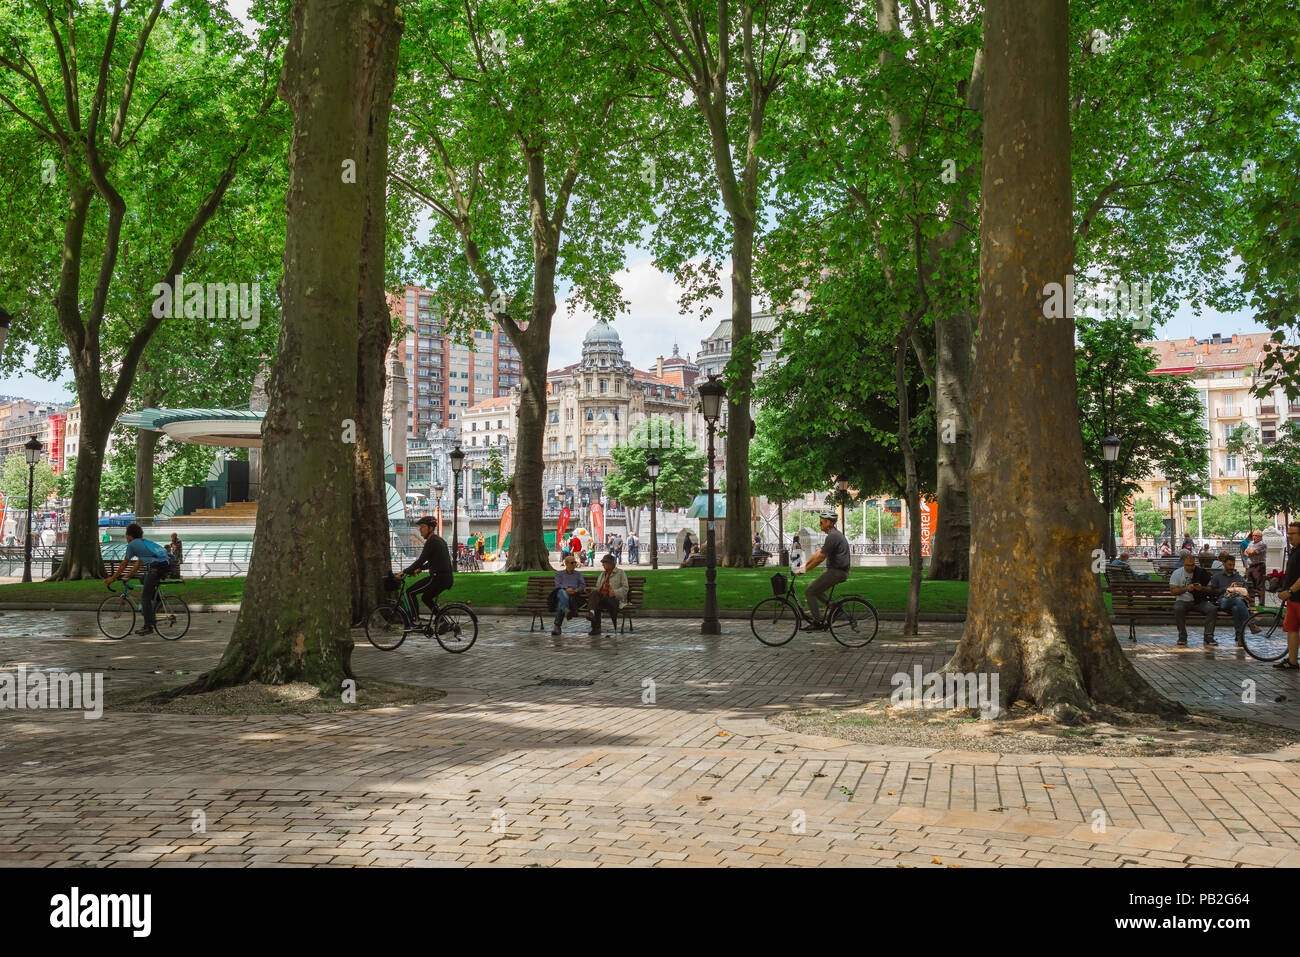 Bilbao park summer, view of people cycling through the tree-lined Paseo del Arenal in the center of Bilbao, Northern Spain. Stock Photo